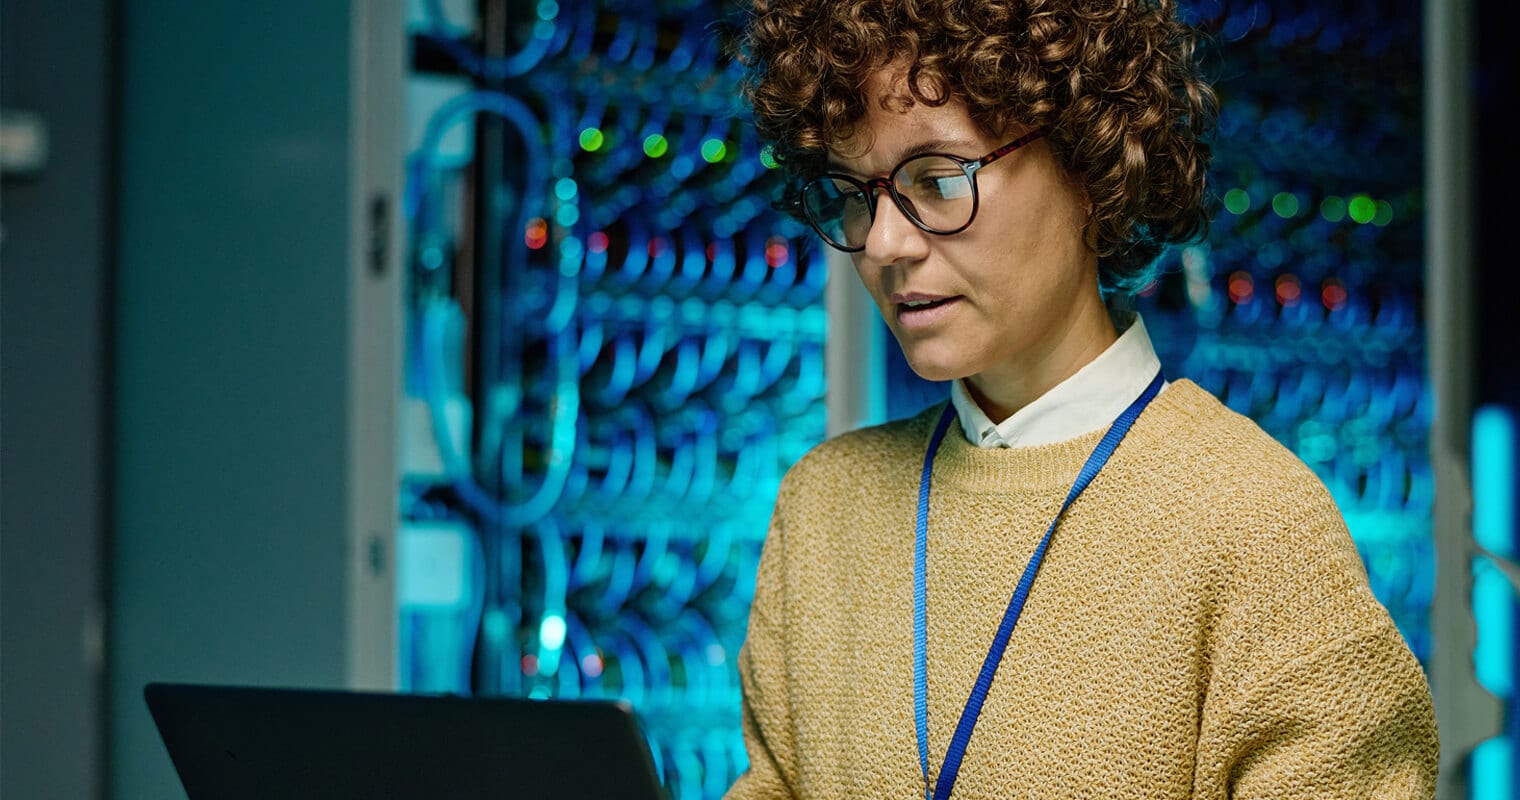 A tech professional woman analyzes cloud data innovation on a laptop in a server room